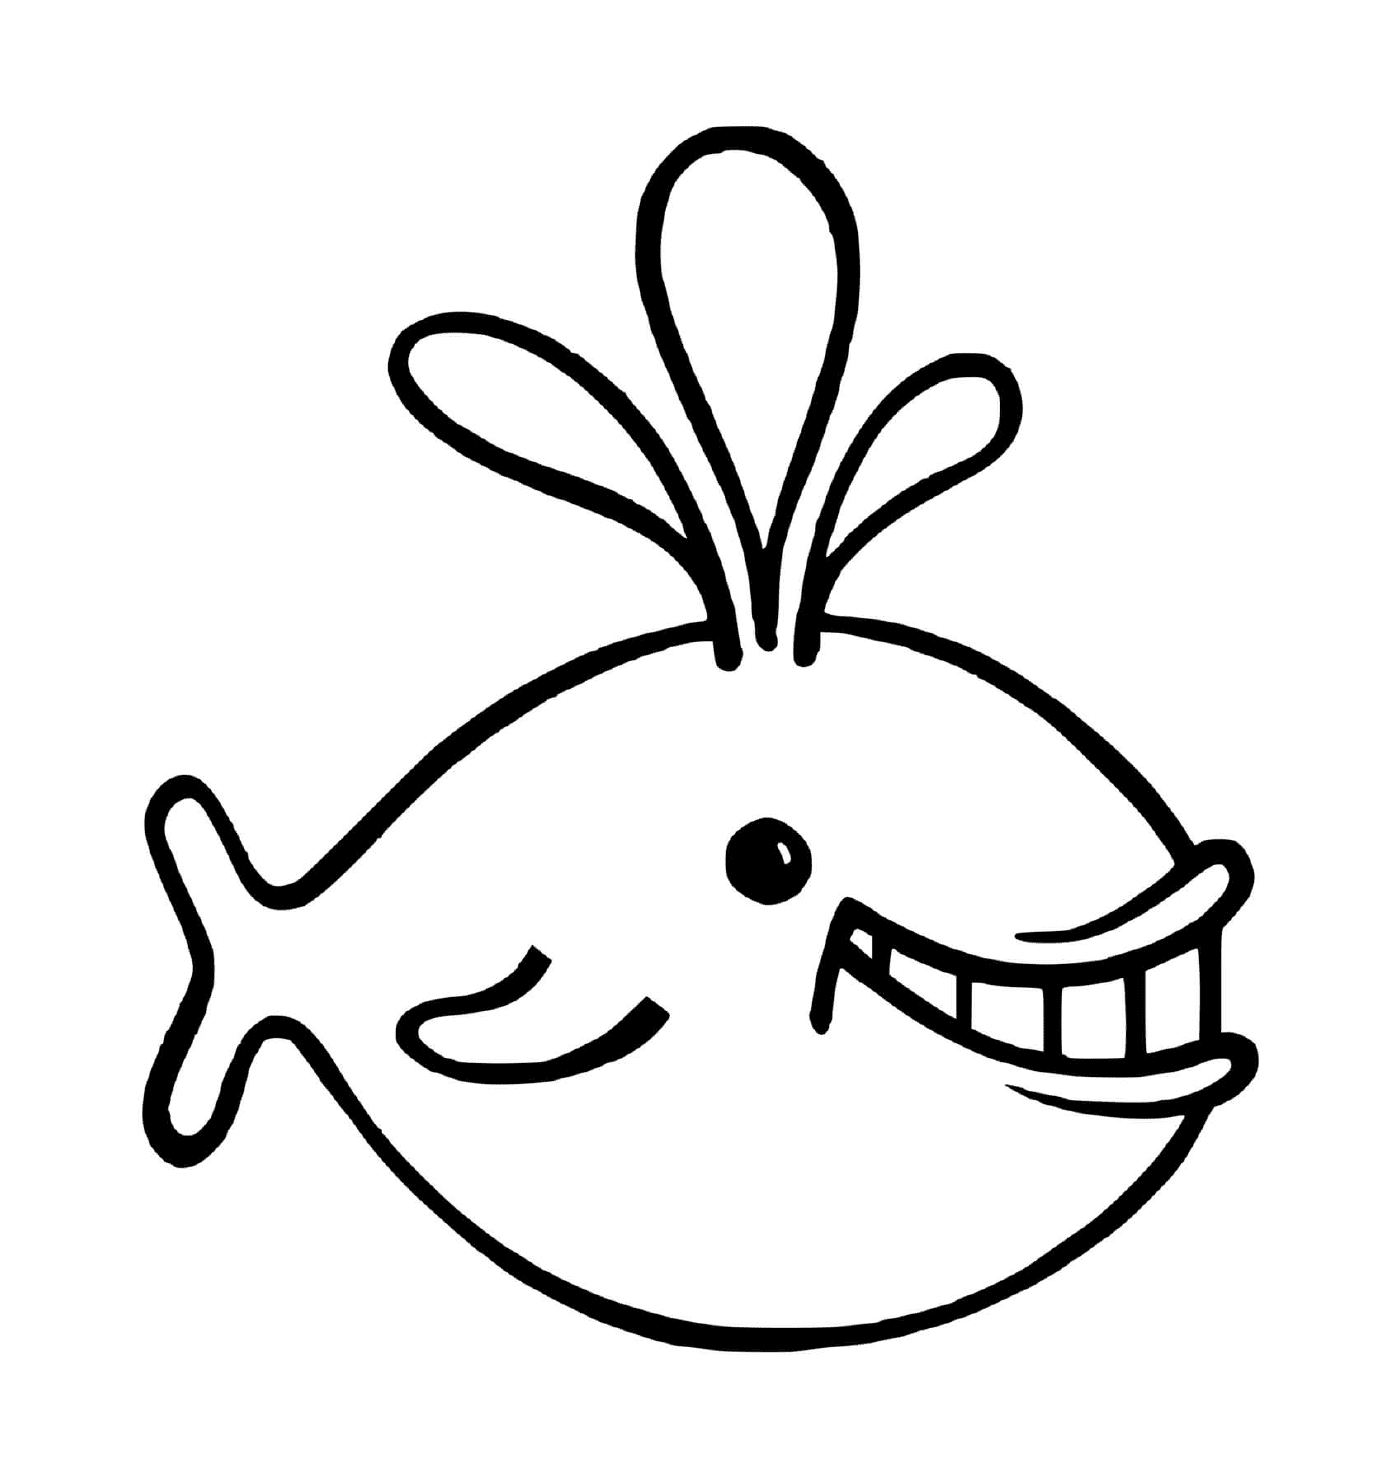  a fish with a big smile on his face 